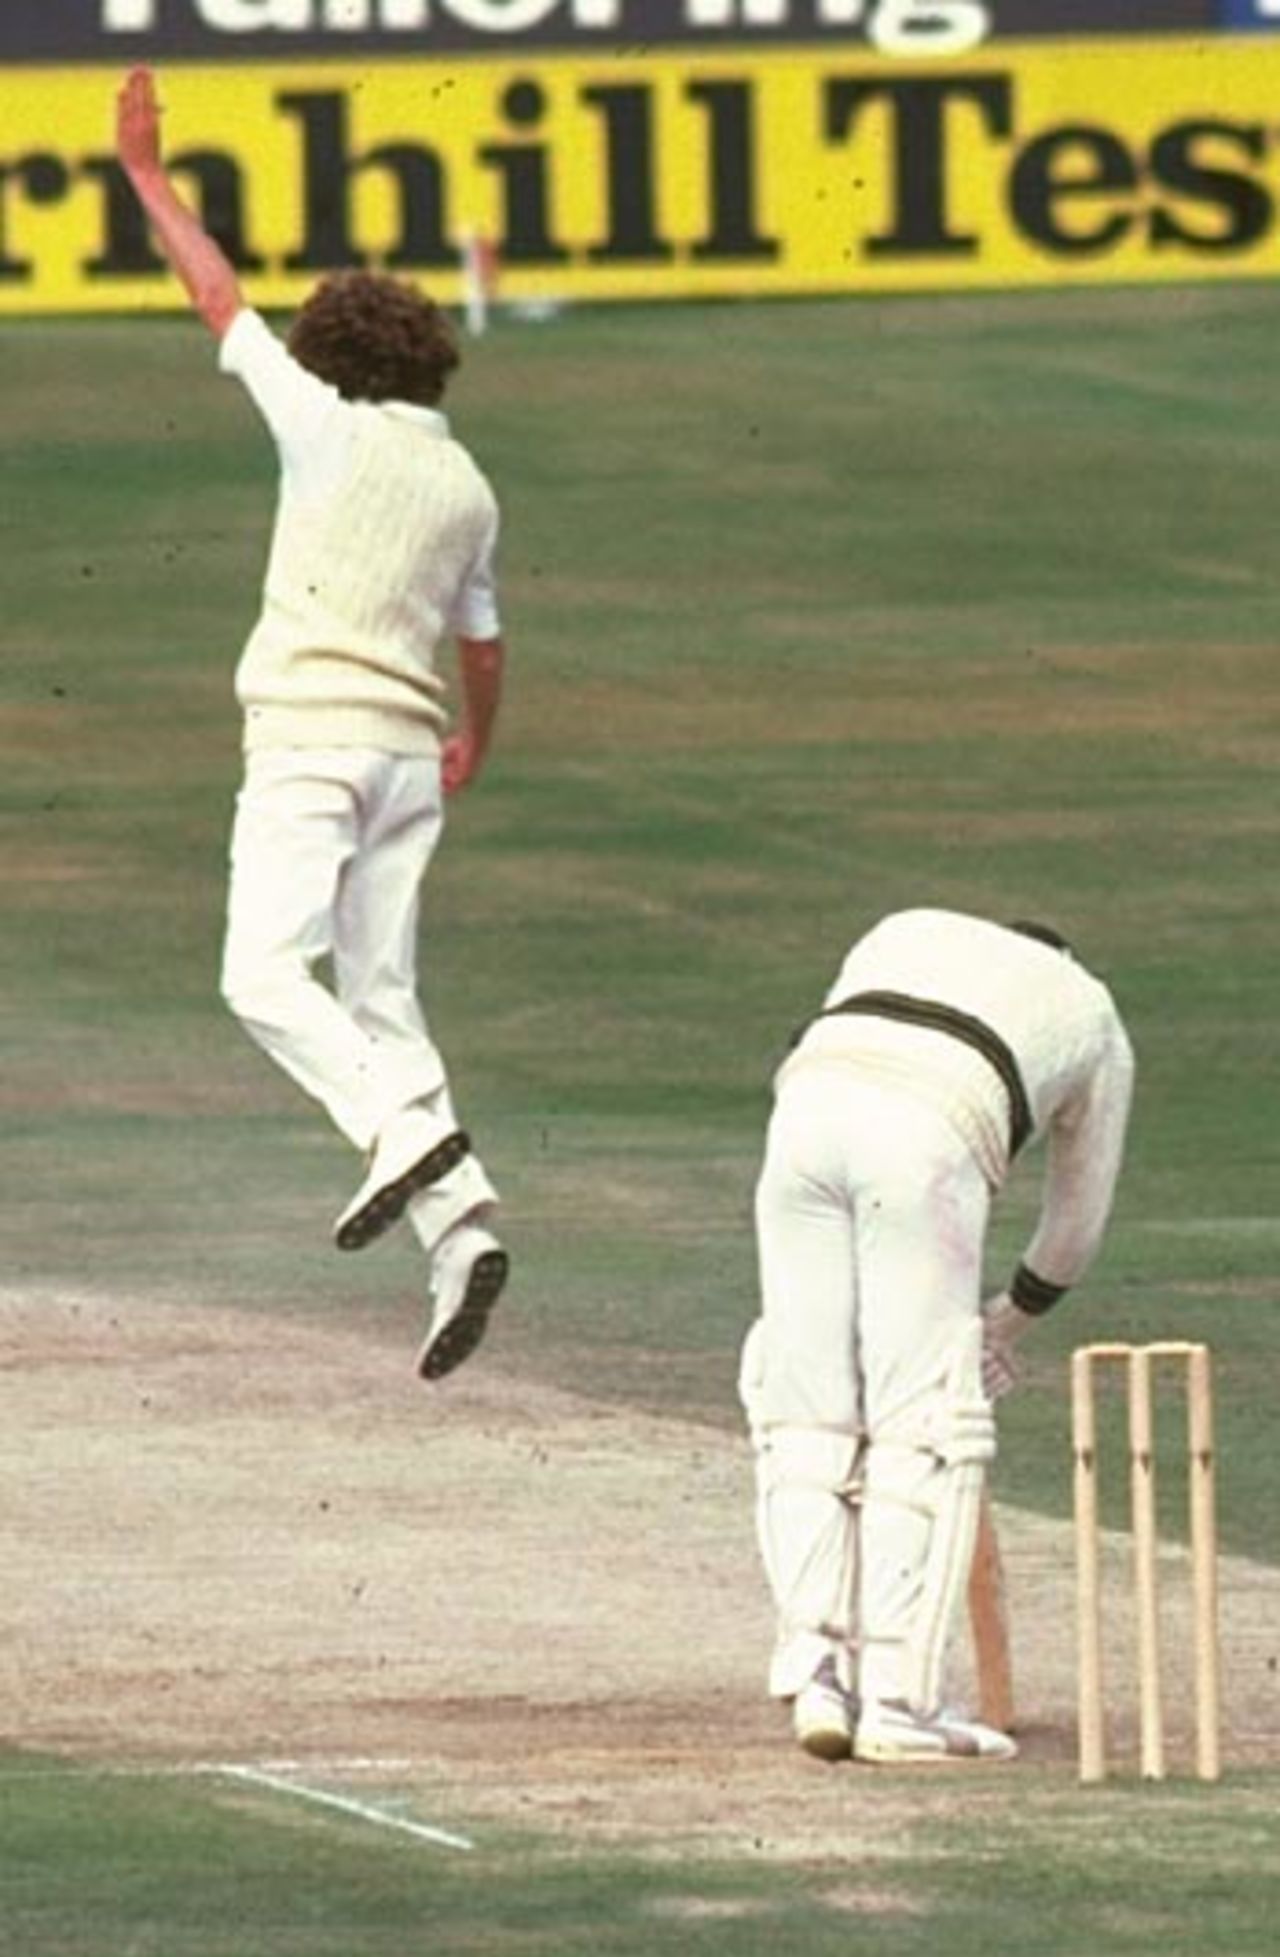 Bob Willis appeals for the wicket of Dennis Lillee, England v Australia, 3rd Test, Headingley, 1981